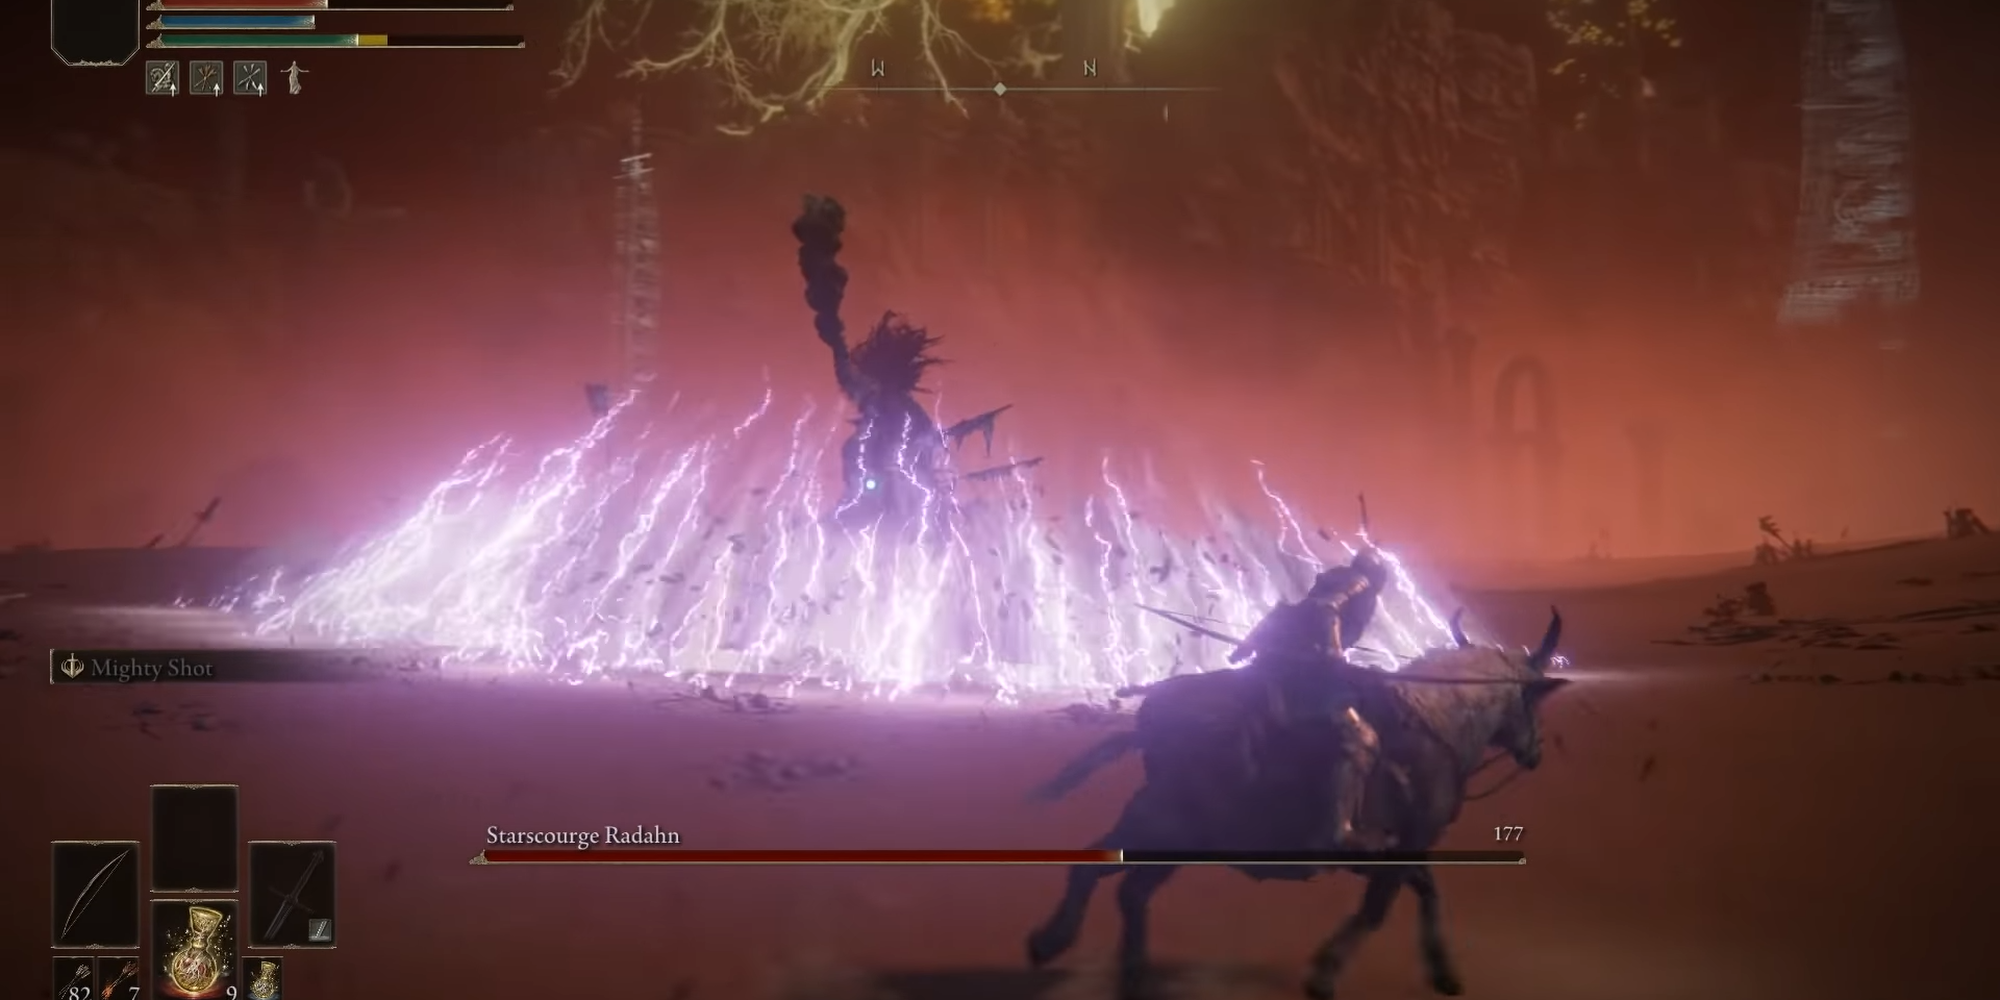 This image shows Starscourge Radahn using his gravity wave attack in Elden Ring.